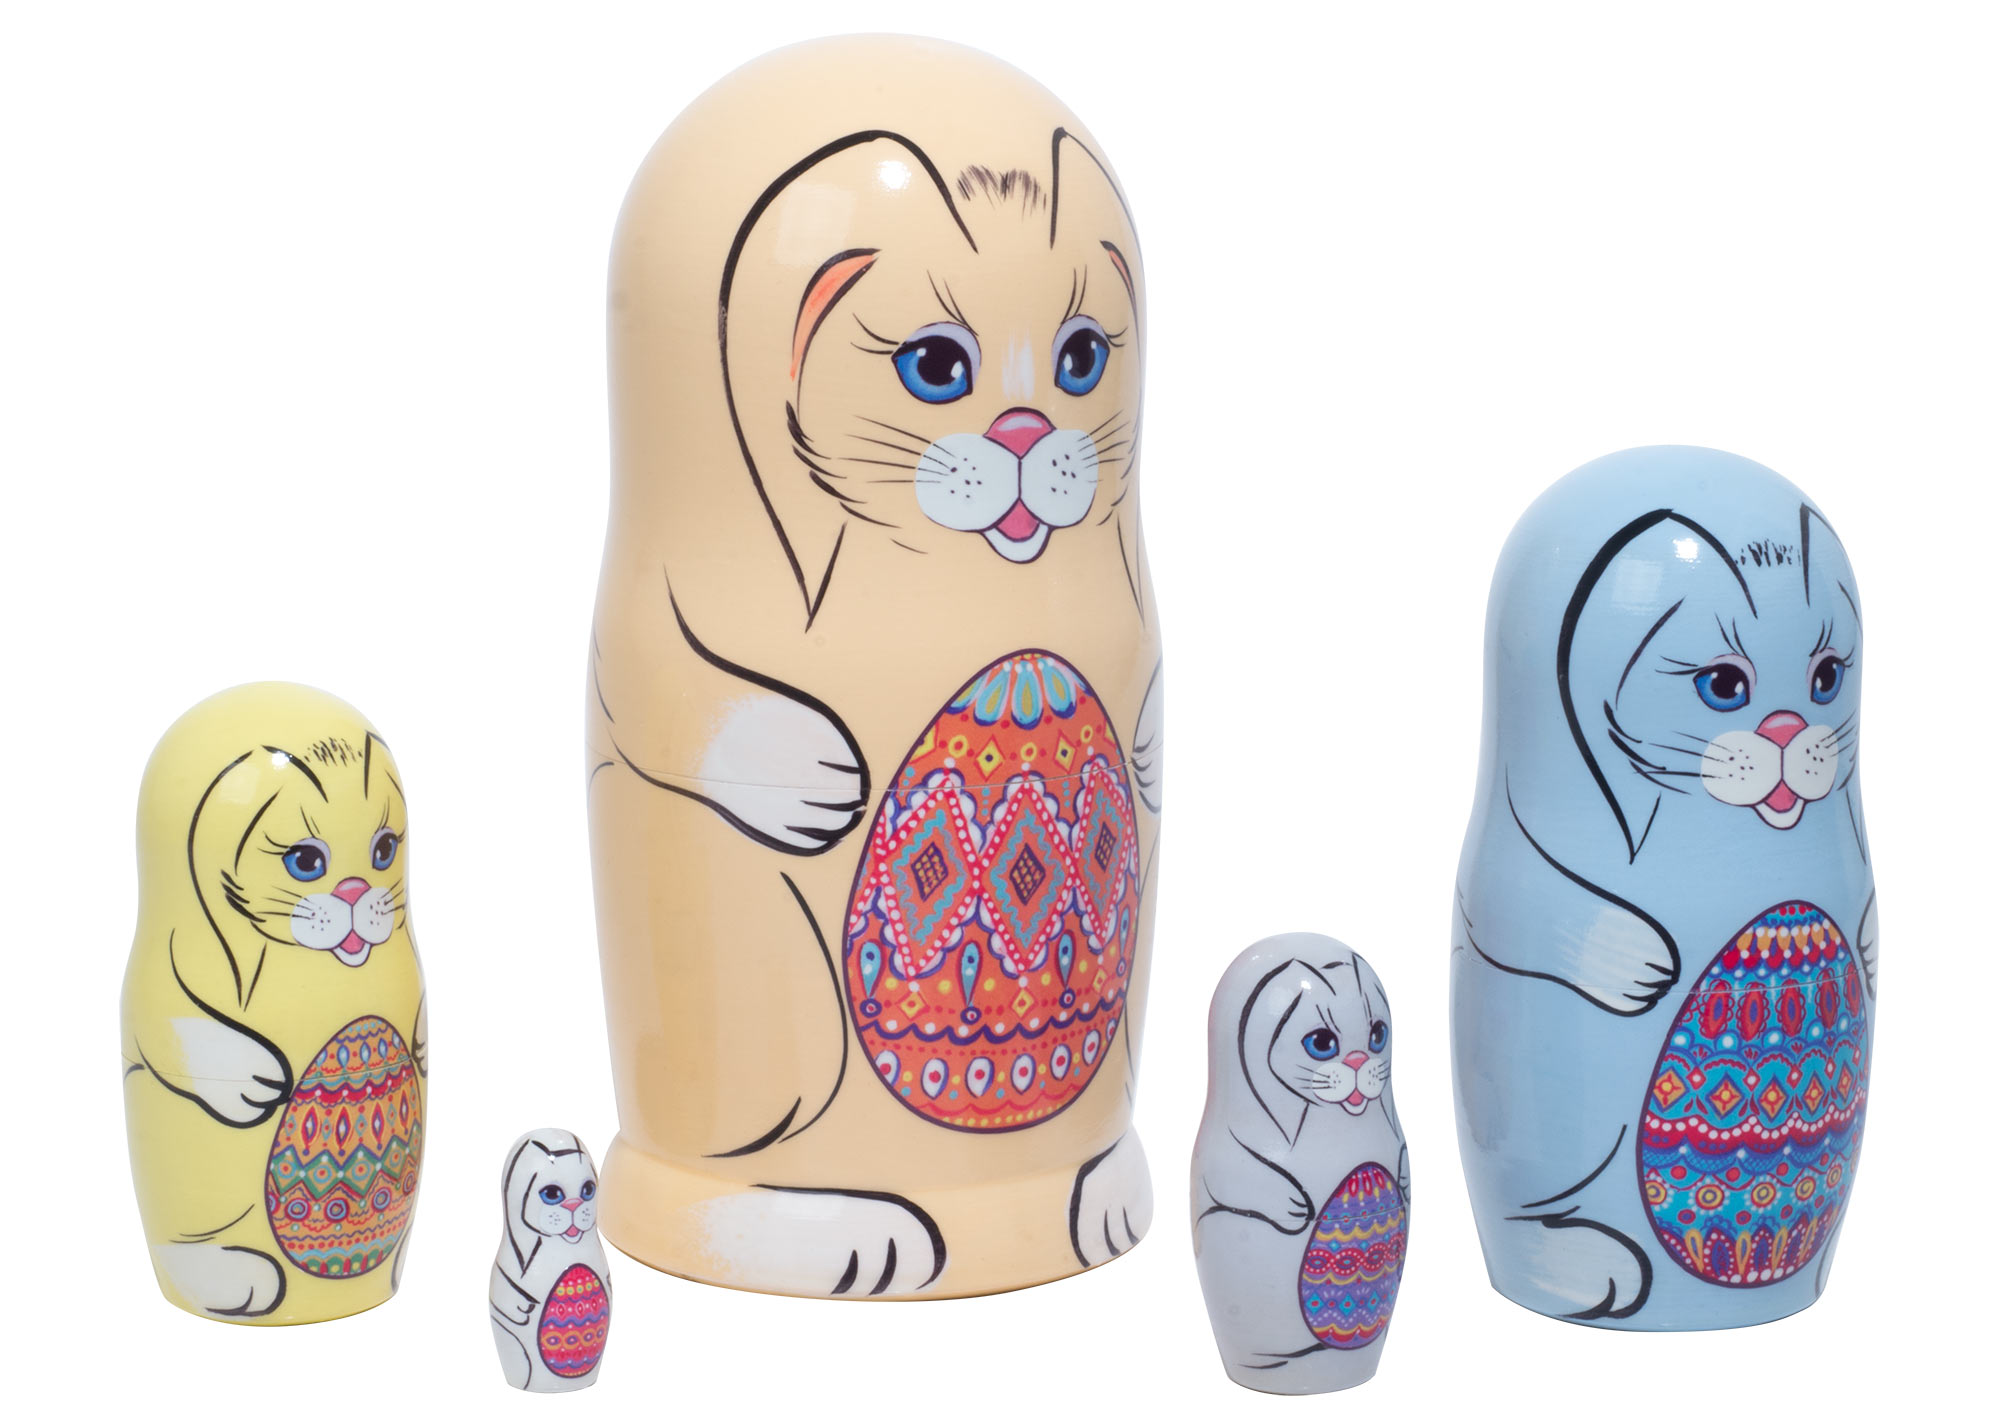 Set of 3 Bunnies with Easter Eggs Matryoshka Russian Nesting Dolls